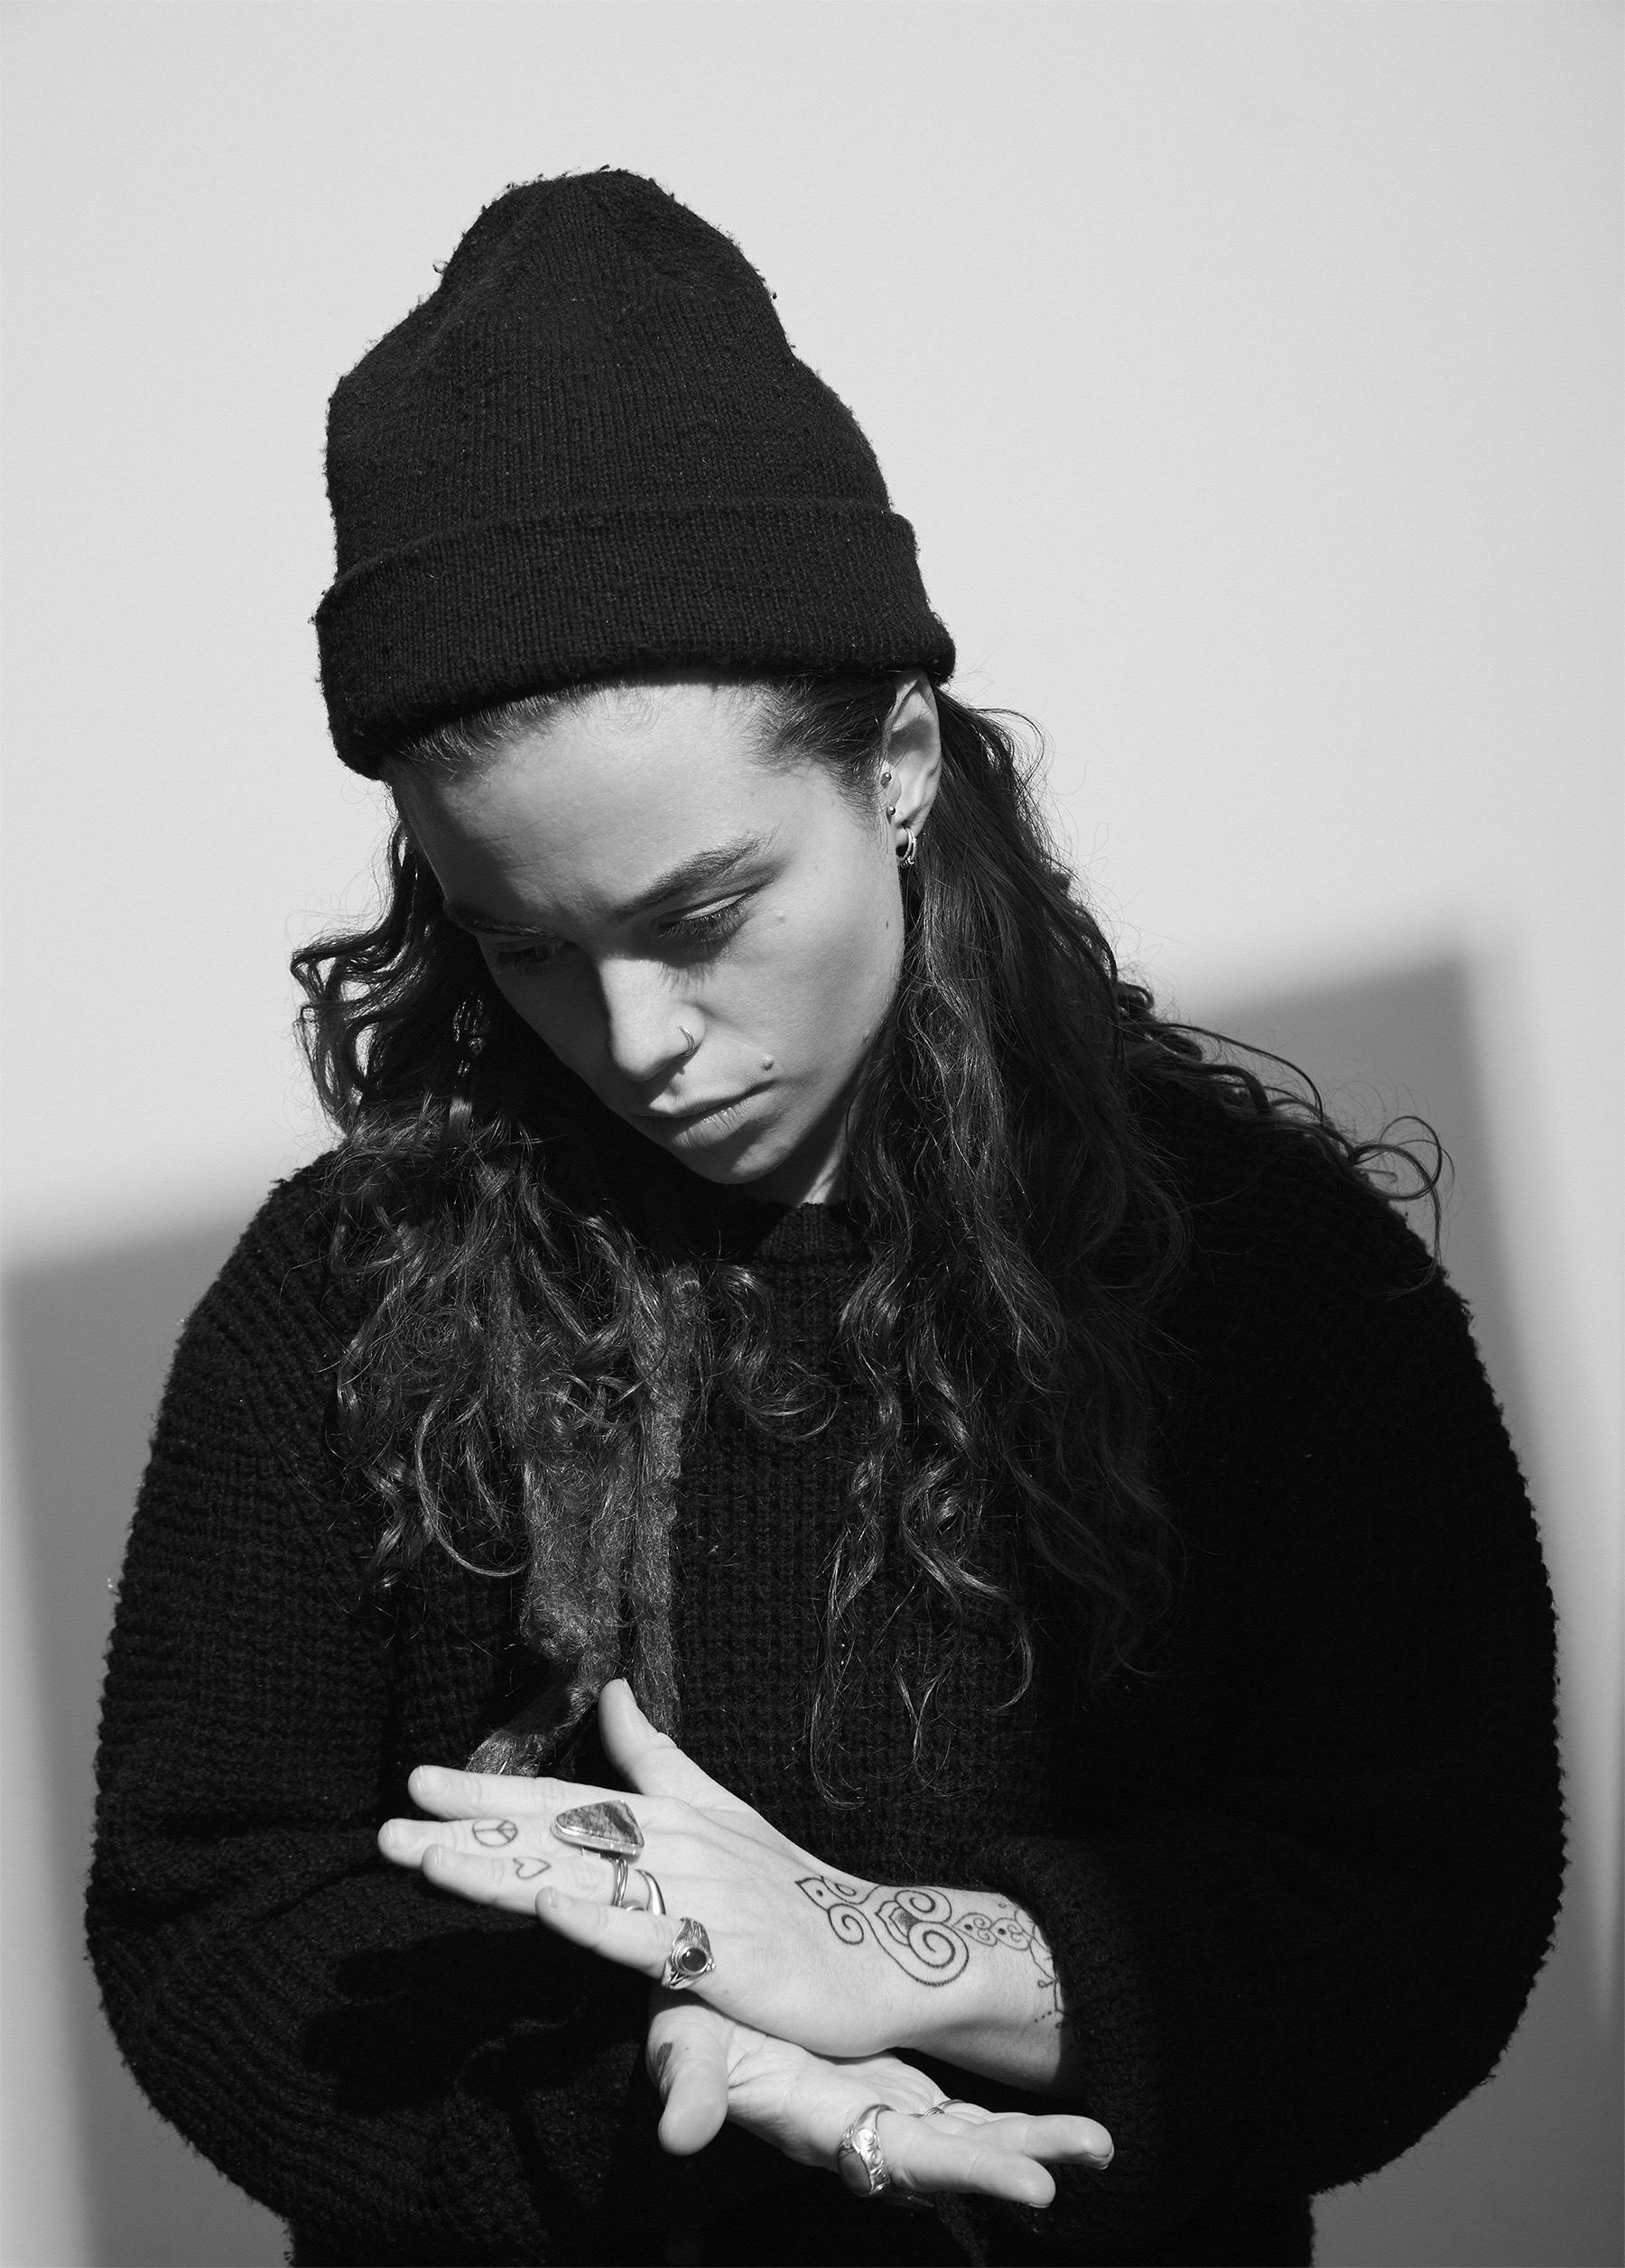 Tash Sultana Announces New Tour Dates and Shares a New Music Video for "Notion"